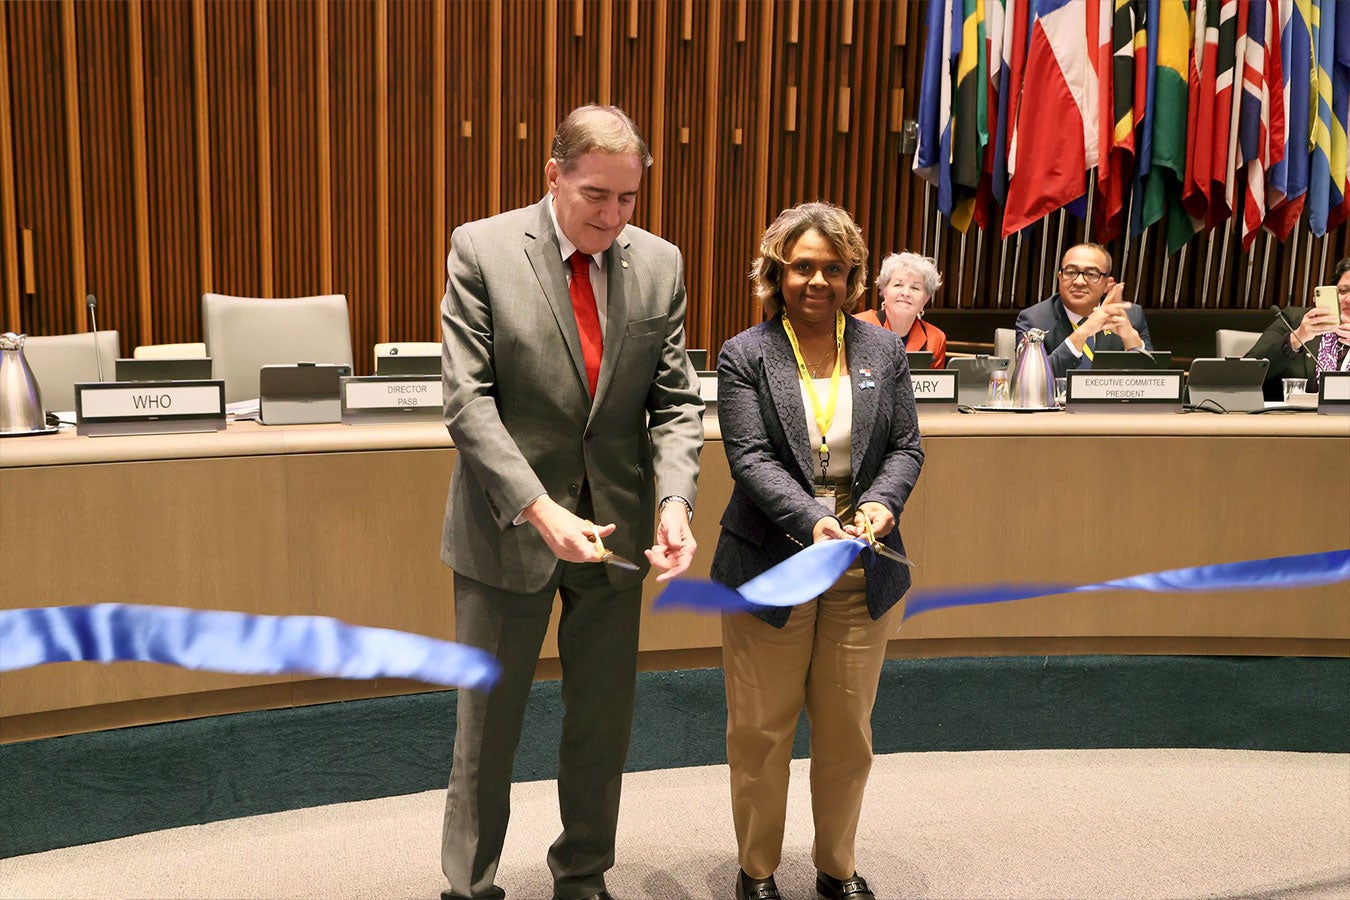 Dr. Jarbas Barbosa, Director of PAHO/WHO, and the President of the 60th Directing Council of PAHO and Vice Minister of Health of Panama, Ivette Berrío, cut the ribbon to inaugurate the PAHO building after an extensive renovation.